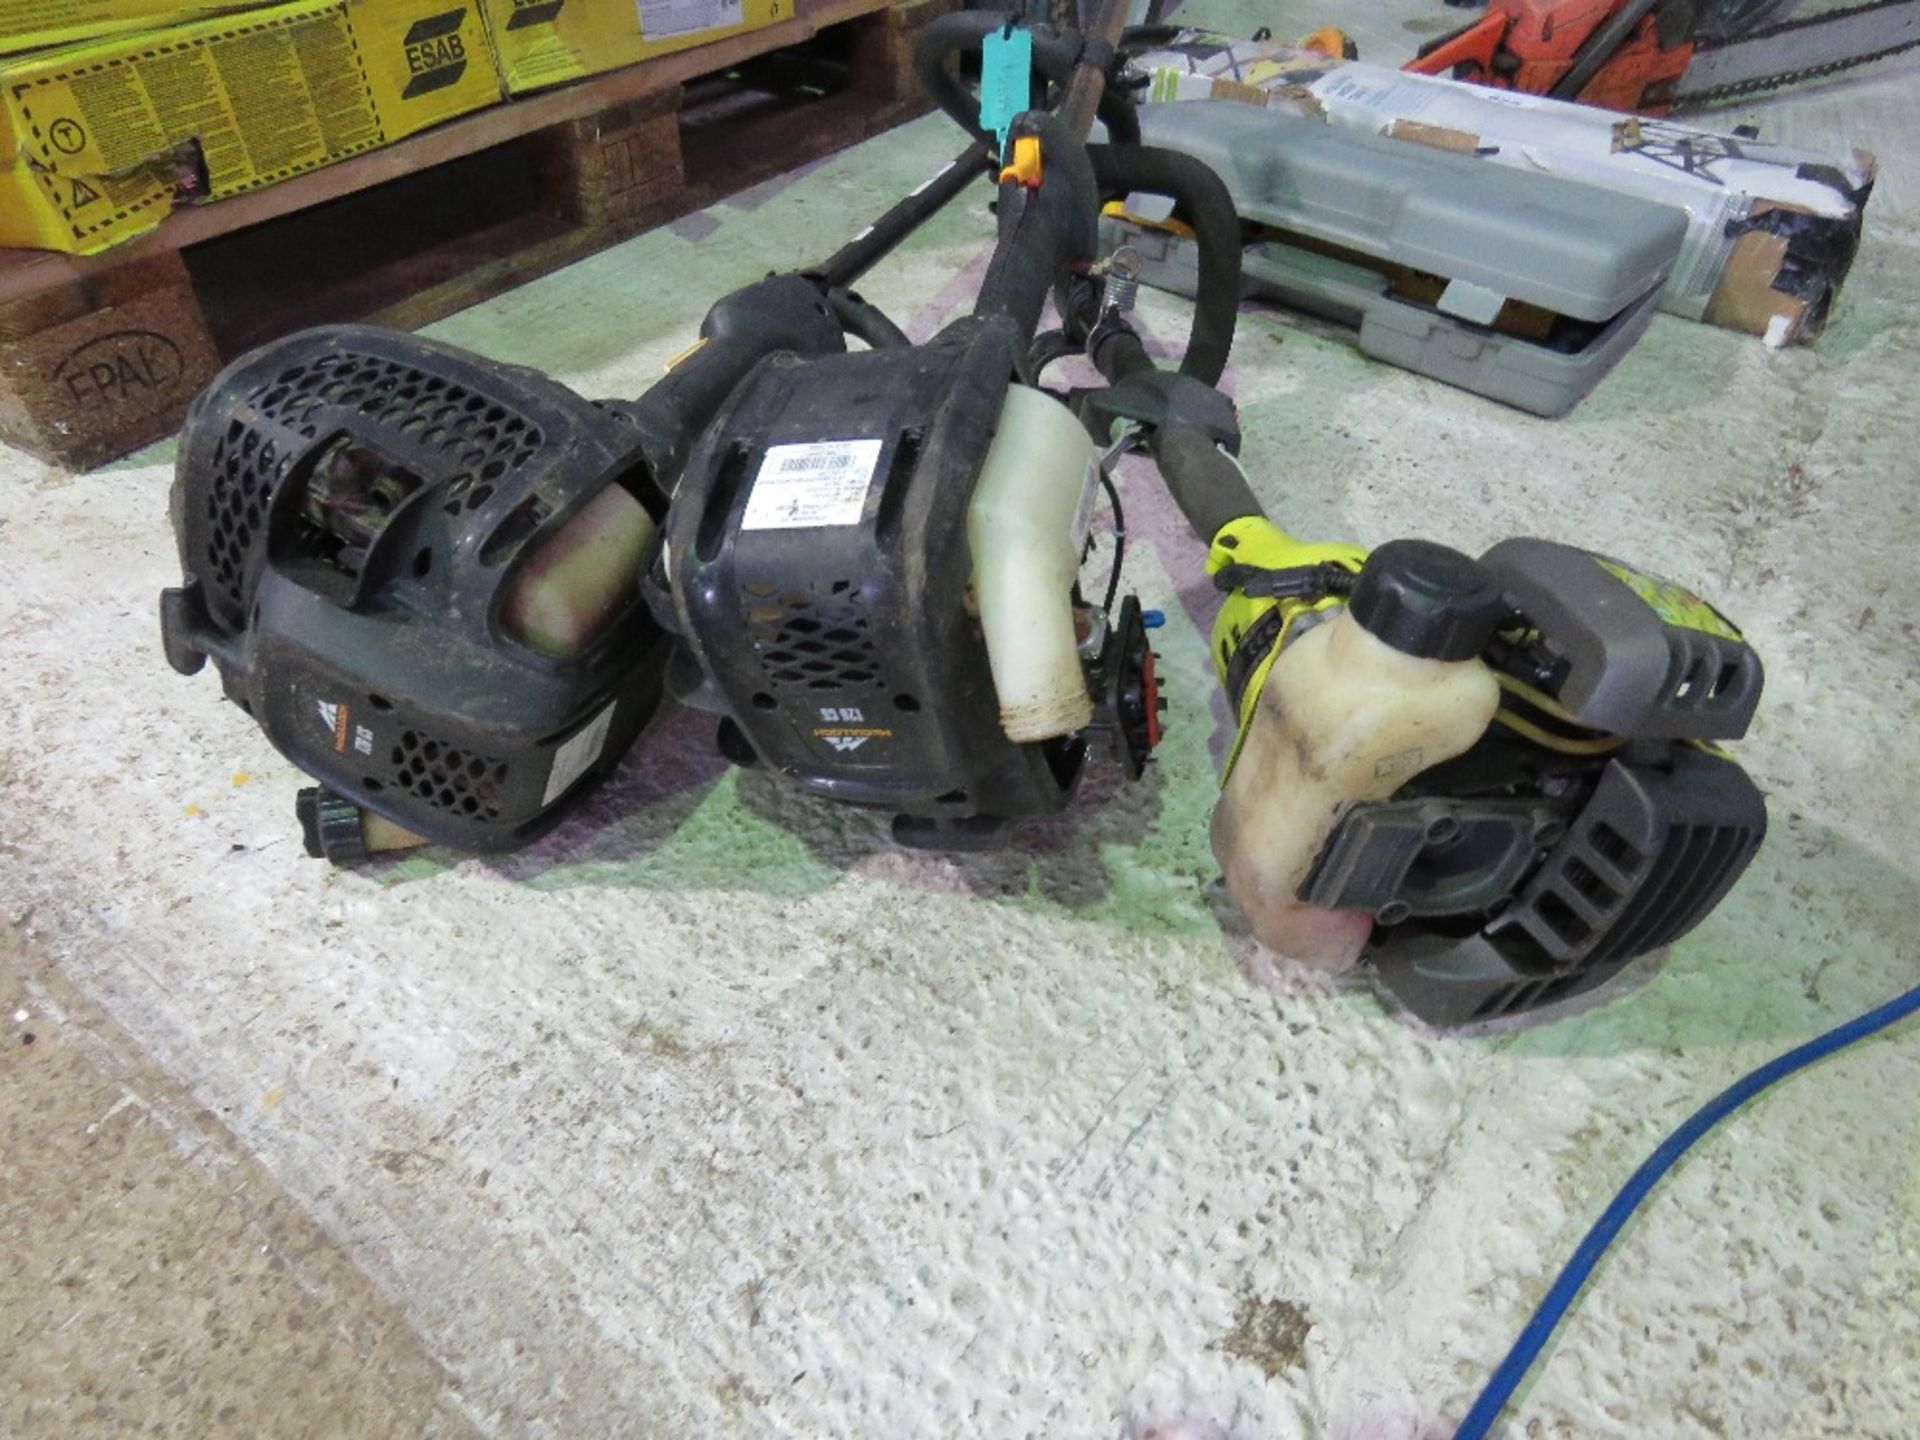 2 X MULTI TOOL POWER DRIVE HEADS PLUS A STRIMMER. - Image 4 of 6